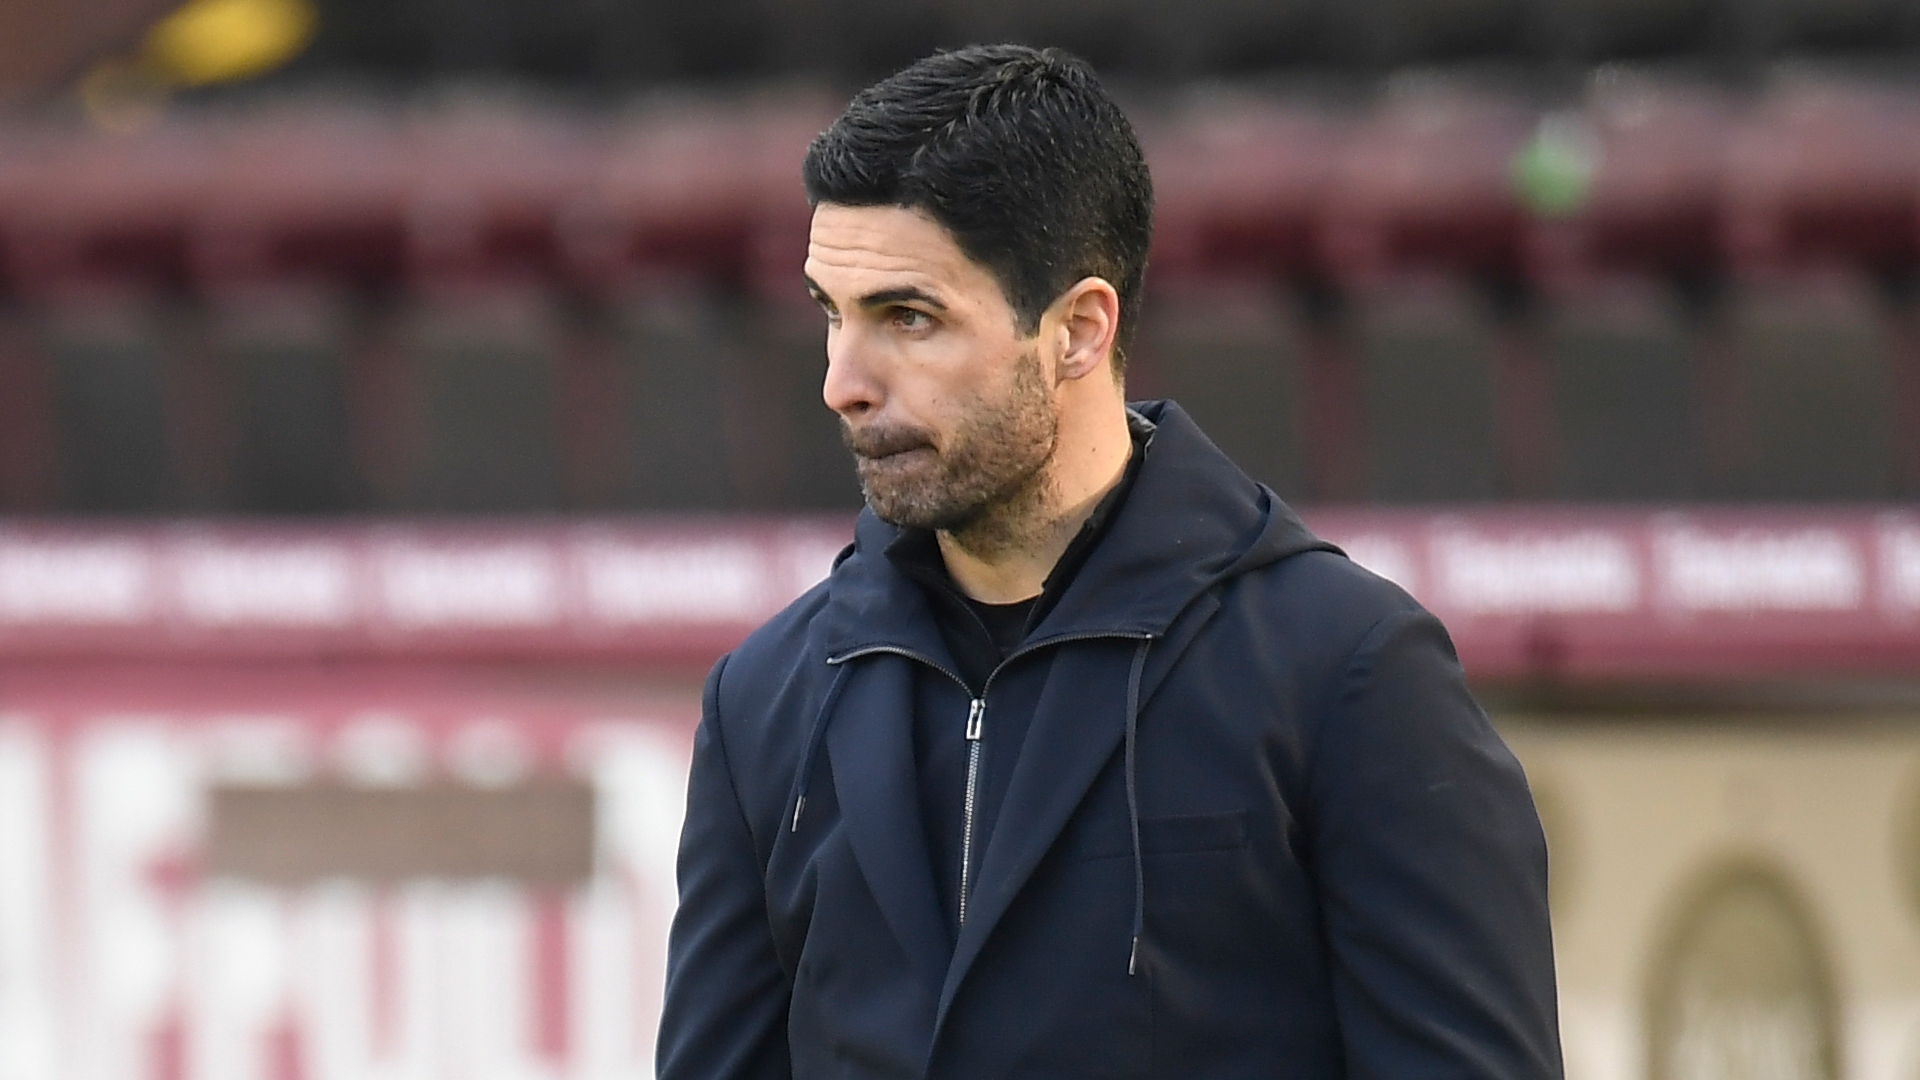 Arsenal are unlikely to qualify for Europe this season and manager Mikel Arteta feels some of his players could have done more.